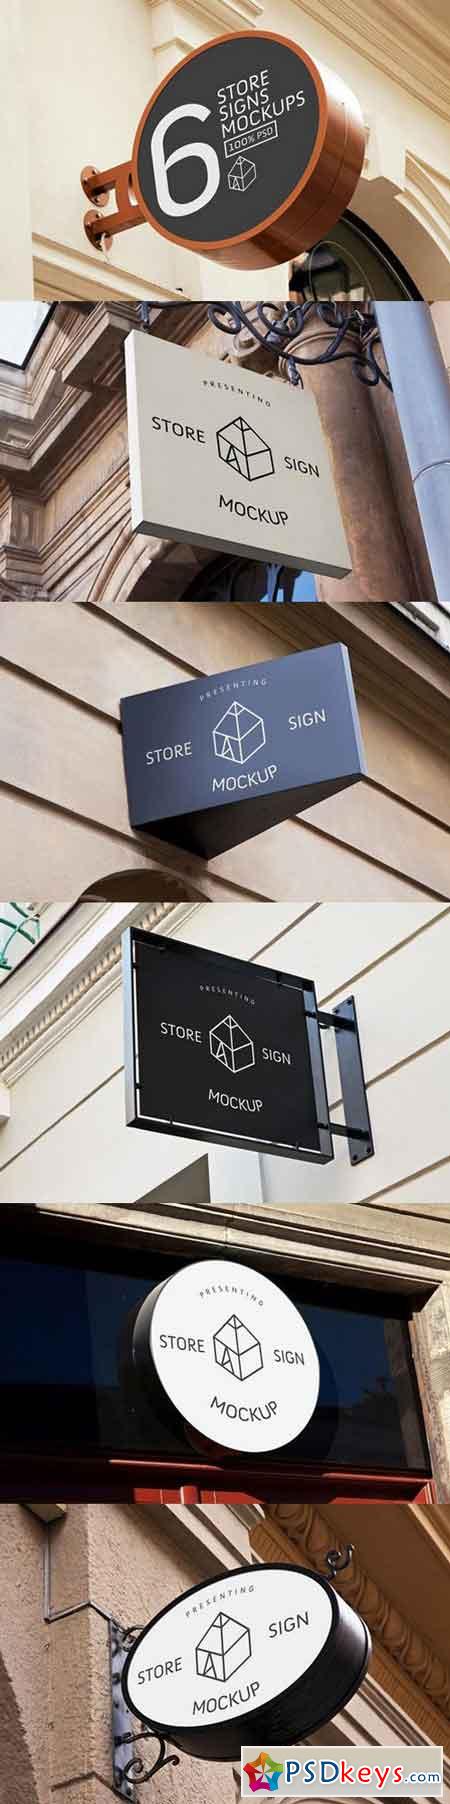 Store Signs Mock-Ups 680201